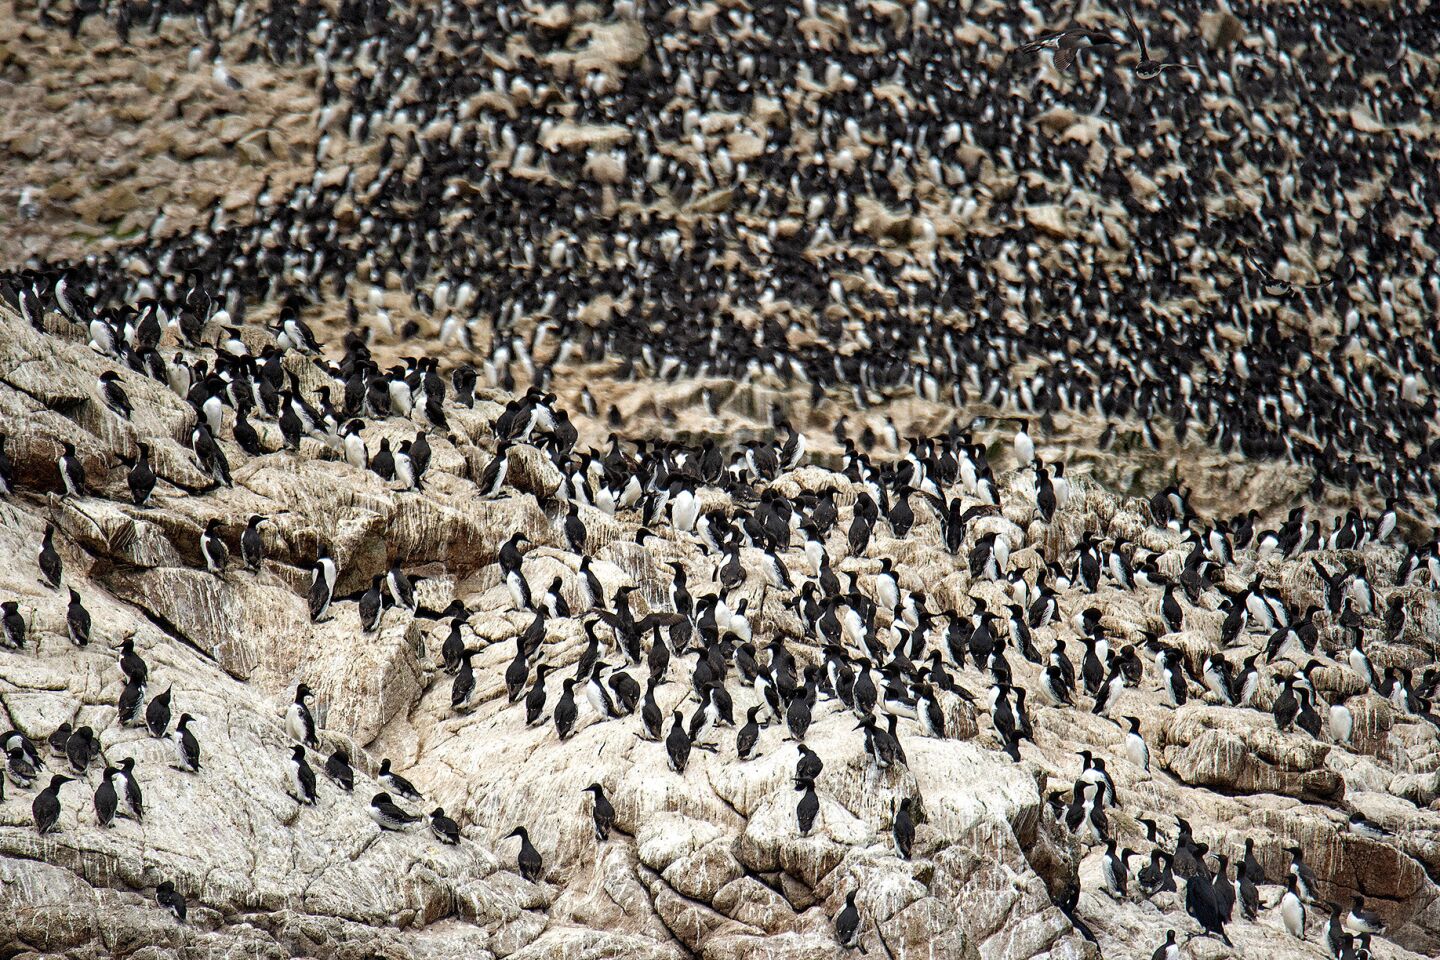 Wildlife thrives on the Farallon Islands — for now